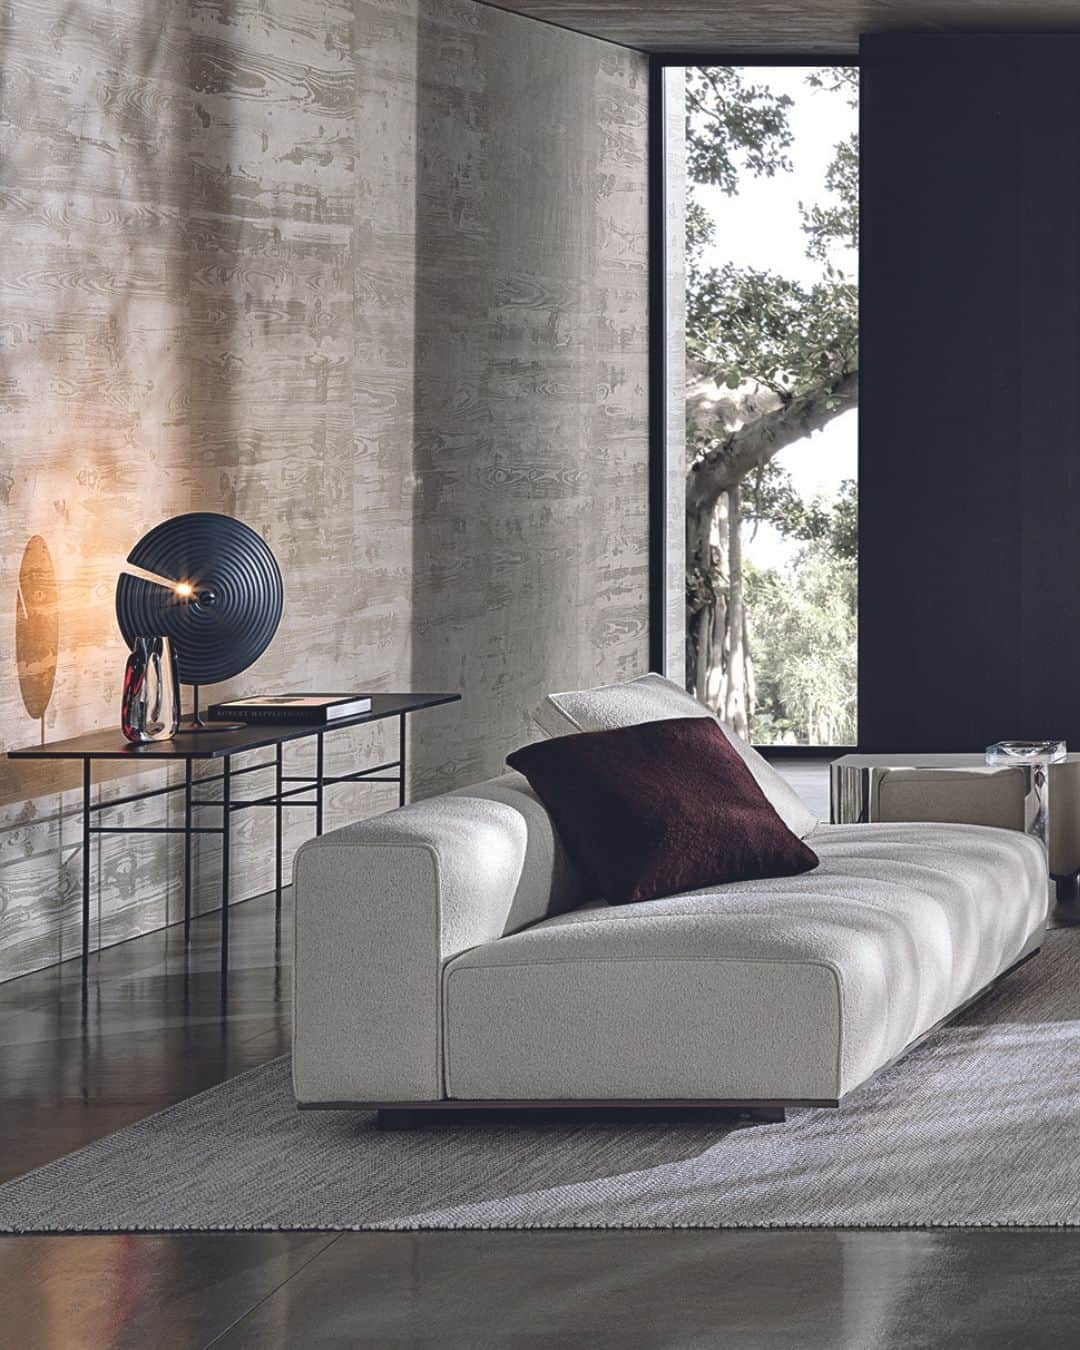 Minotti Londonのインスタグラム：「A detail that becomes volume is the essence of the Goodman design, the new modular seating system by @rodolfodordoni.  With a clear 1970s imprint, the inspiration behind this design is the graphic character of those years, its ability to stratify and cross marks, reducing the complexity of things into a few distinctive features.  In this way, in Goodman the mark of the matelassé stitching, typical of Minotti's tailoring processes, draws shadows and light on the seat, creating the sensation of a quilted cross-padding.  The system is suspended from the floor on refined Bronze or Polished Chrome metal feet, set back from the edge, and a perimeter frame that matches the same finishes, the optical effect of suspension in Goodman enhances the softness of the seat, offering a super-comfortable welcome.  Tap the link in our bio to discover the Goodman Seating System.  #goodman #minotti #luxuryfurniture #interiordesign #madeinitaly #luxurysofa #sofadesign #sofa #livingroomdecor #livingroomideas #livingroomdesign #rodolfodordoni」